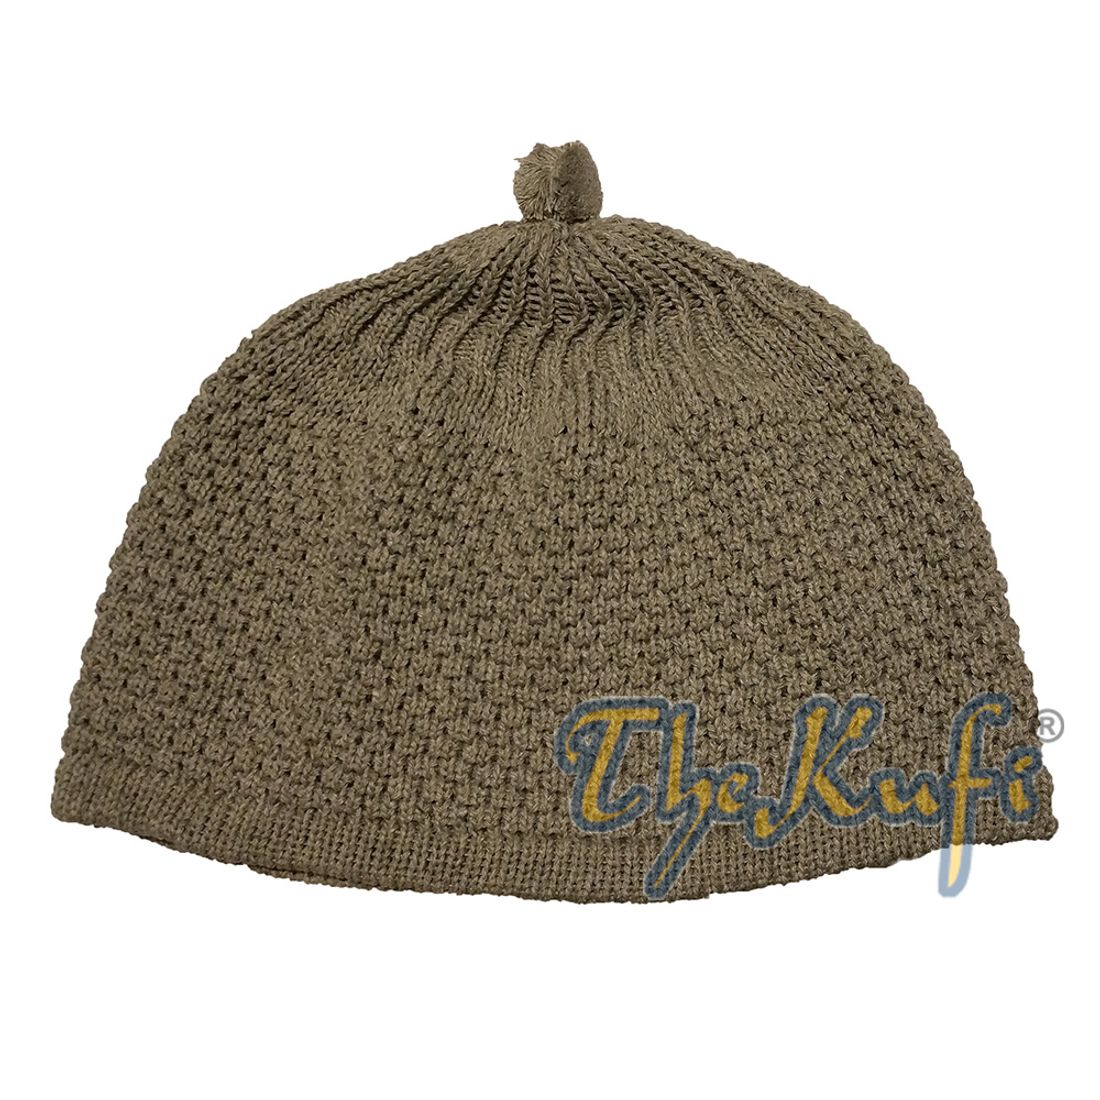 Light Olive Green Turkish-style Knit Stretchy Warm Beanie Hat